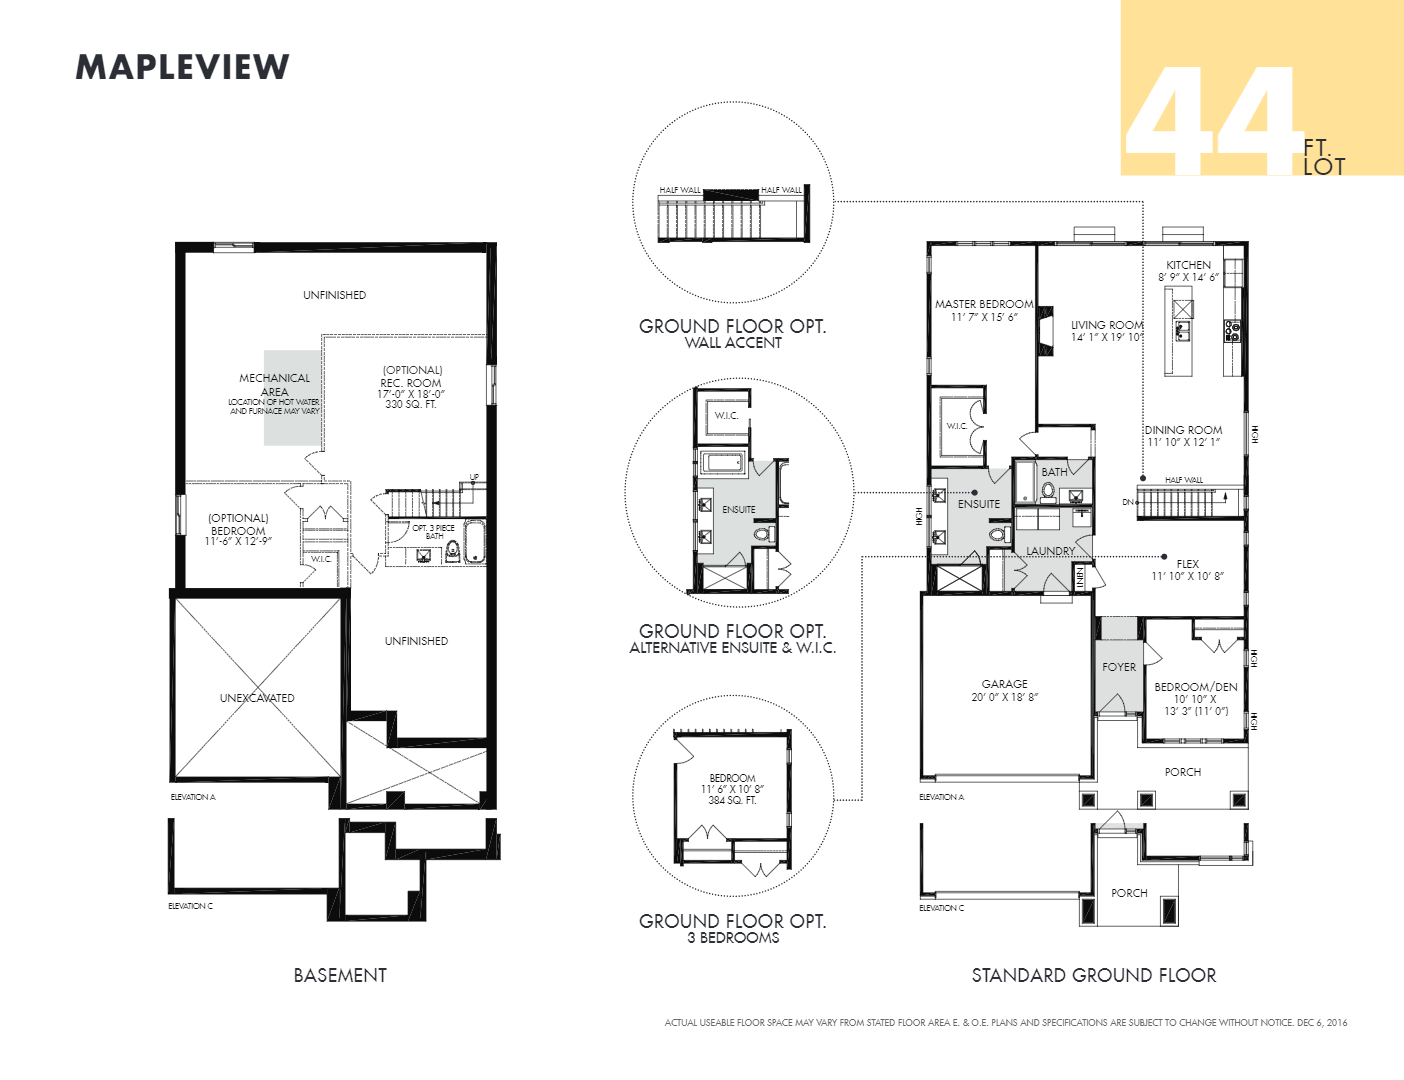 Mapleview Floor Plan of Riverside South Richcraft Homes with undefined beds